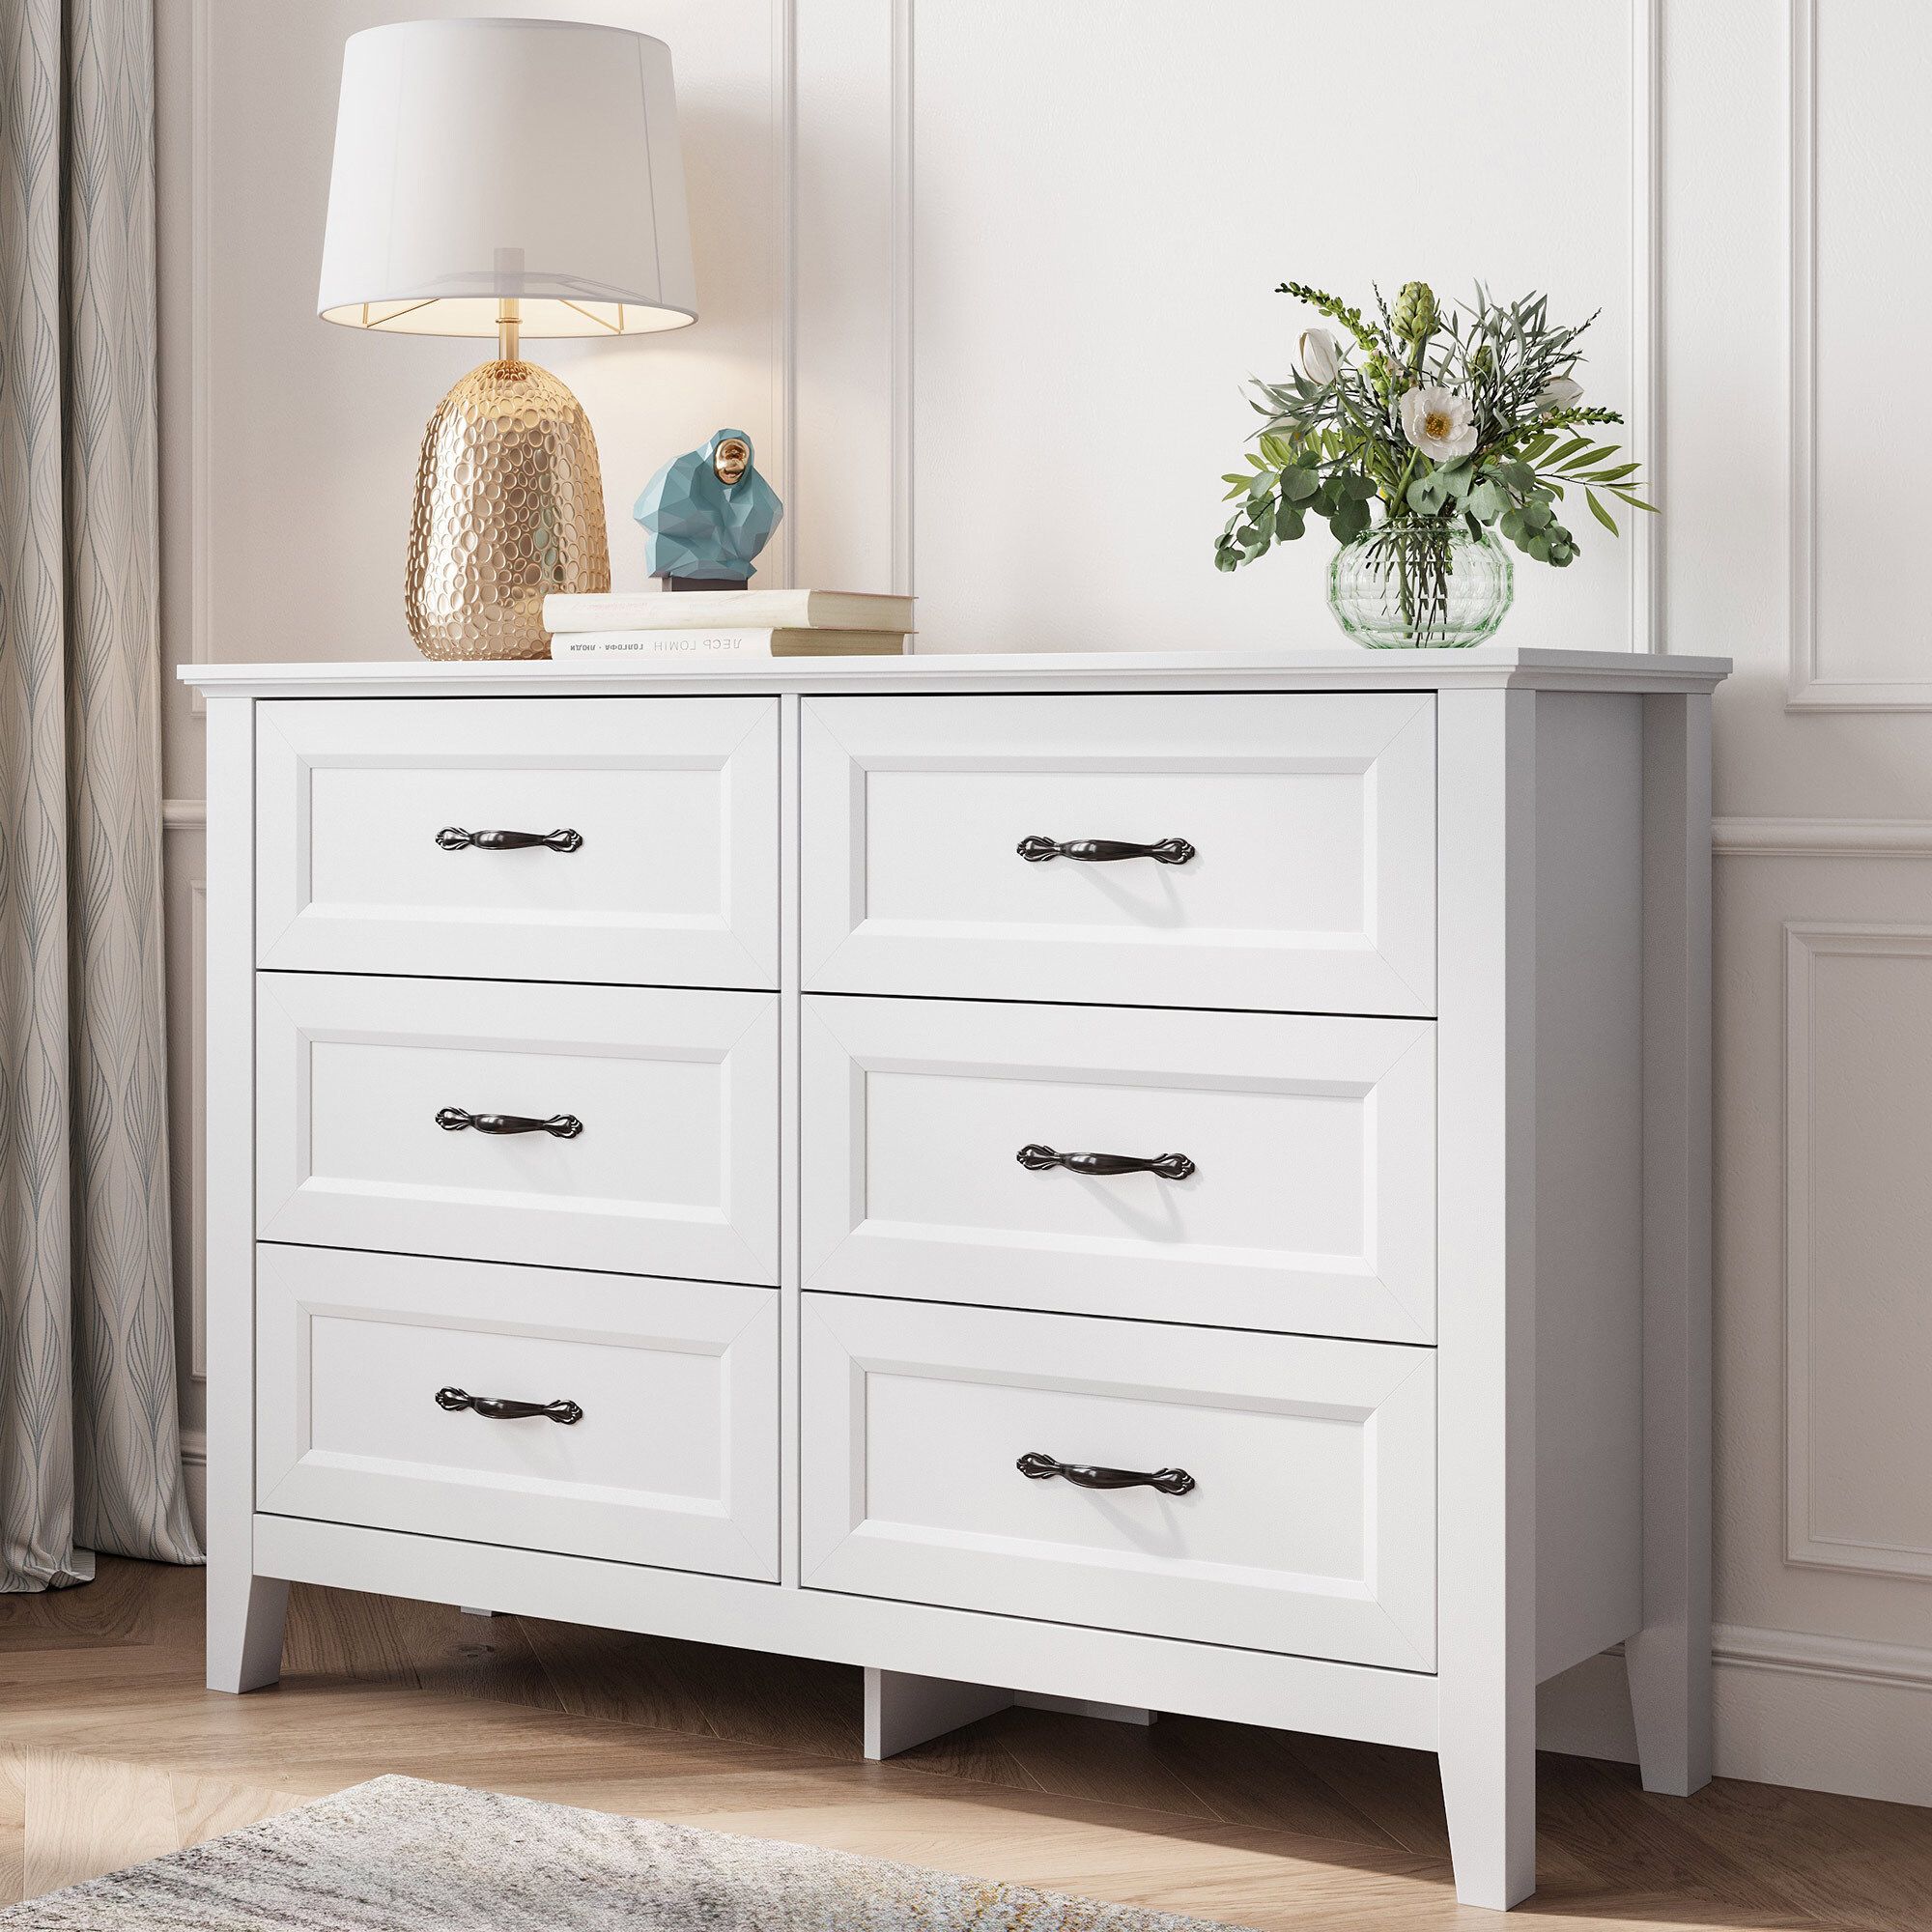 LINSY HOME Dresser for Bedroom, Long Dresser with 6 Drawers and Antique Handles, Chest of Drawers... | Walmart (US)